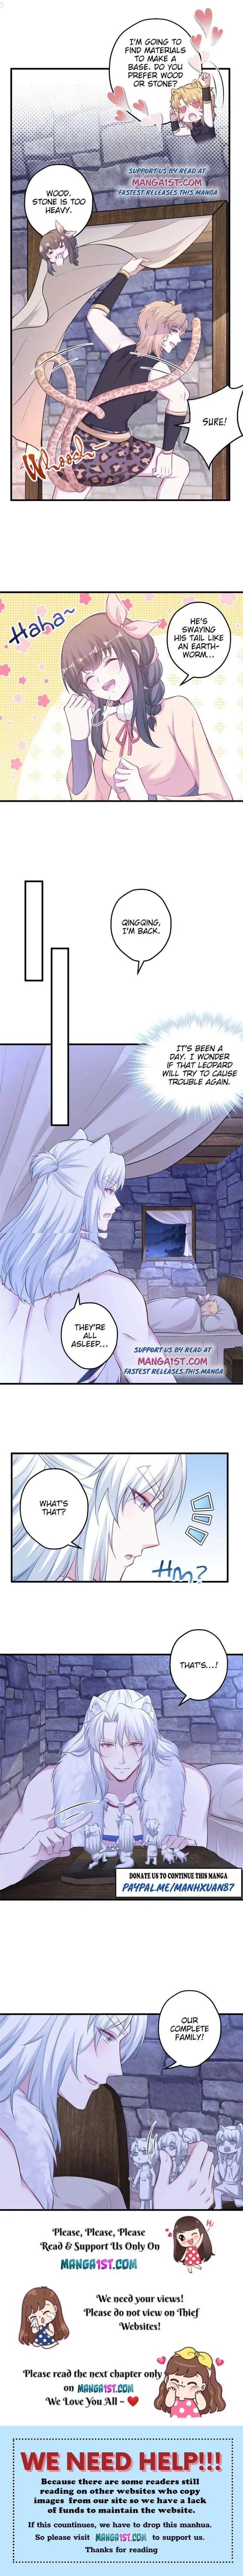 Beauty and the Beasts Chapter 448 page 6